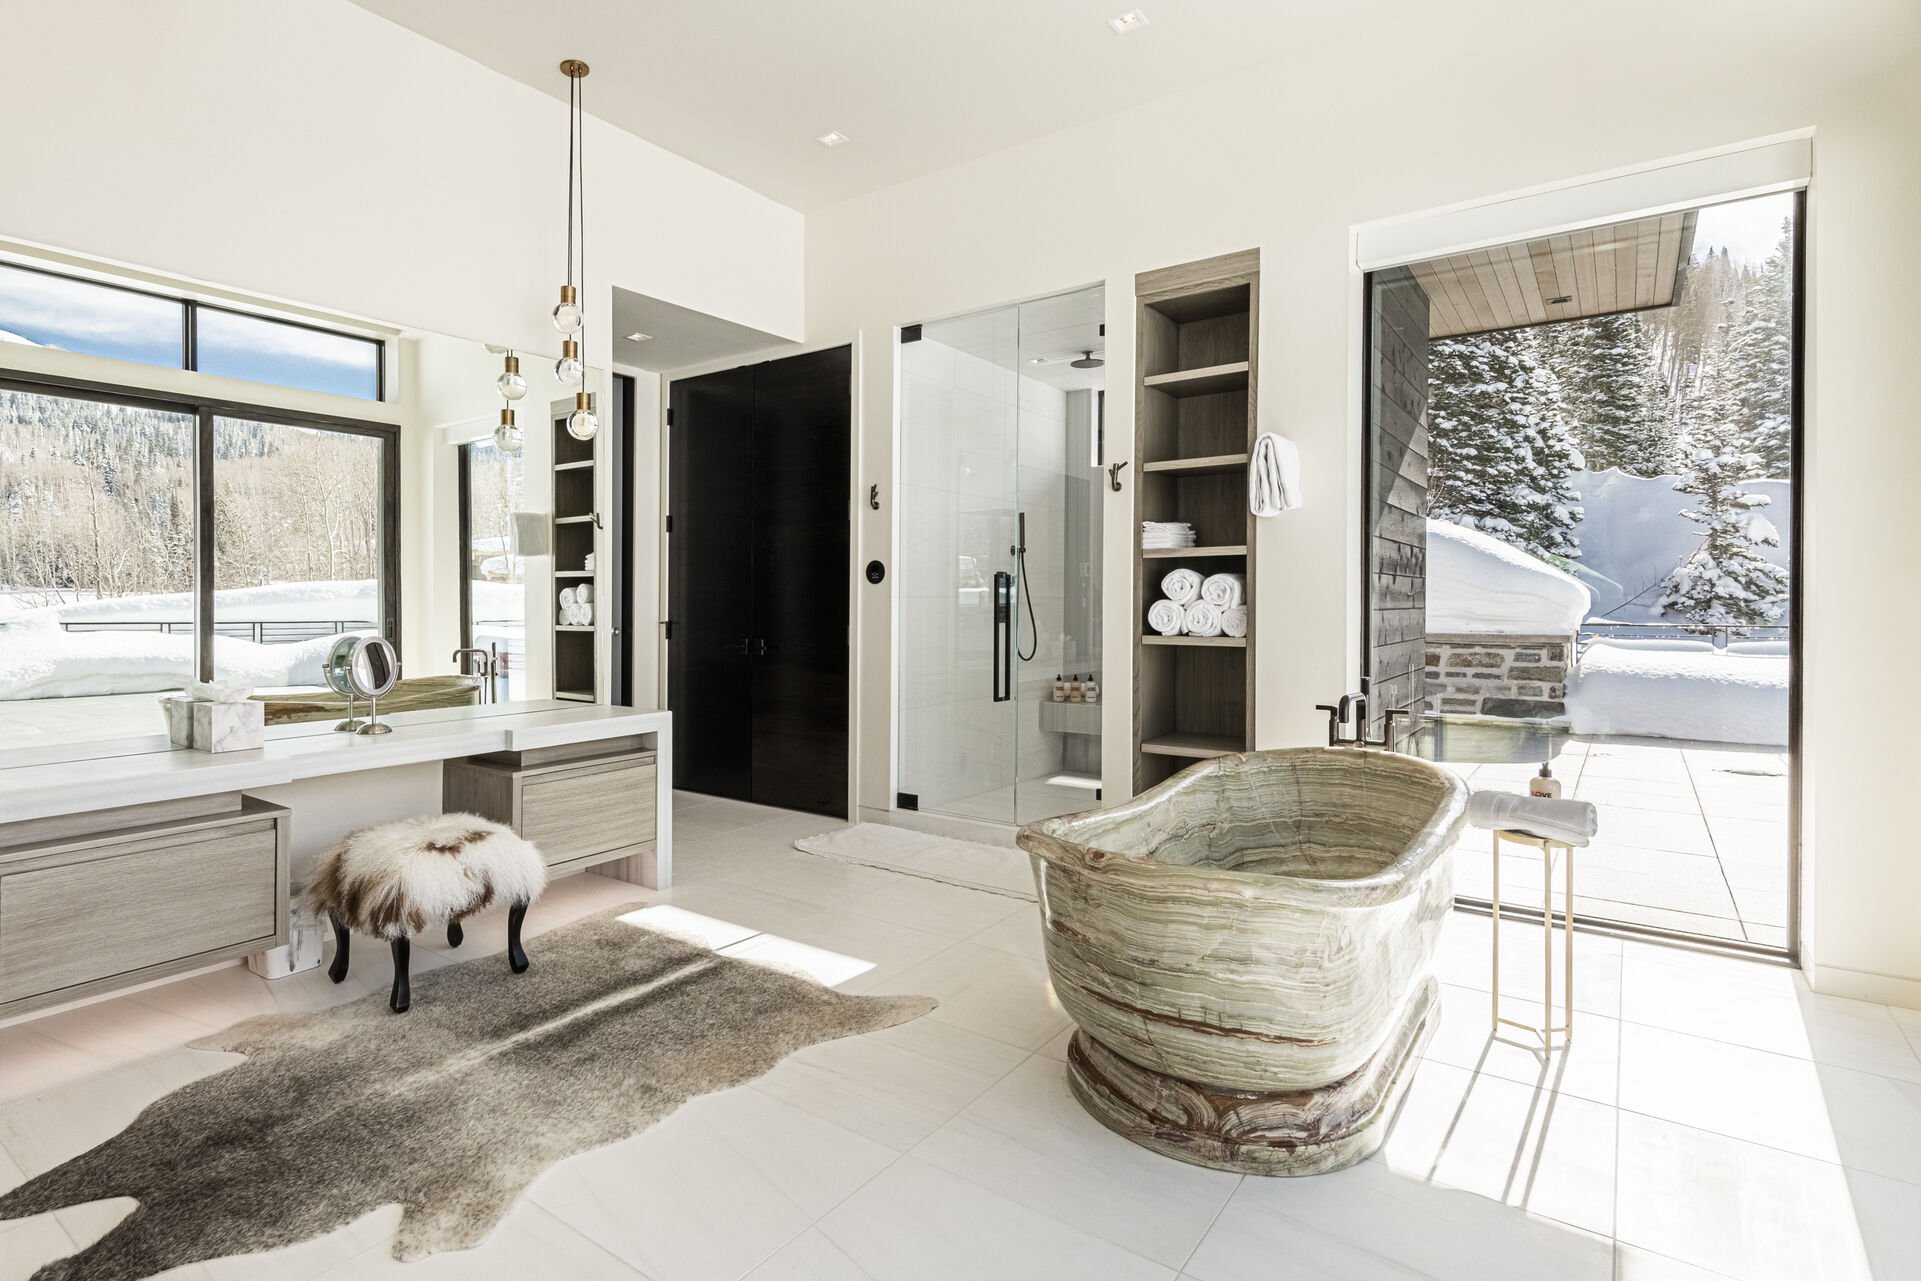 Grand master en suite with a steam shower, laundry closet, make-up area and walk-in closet